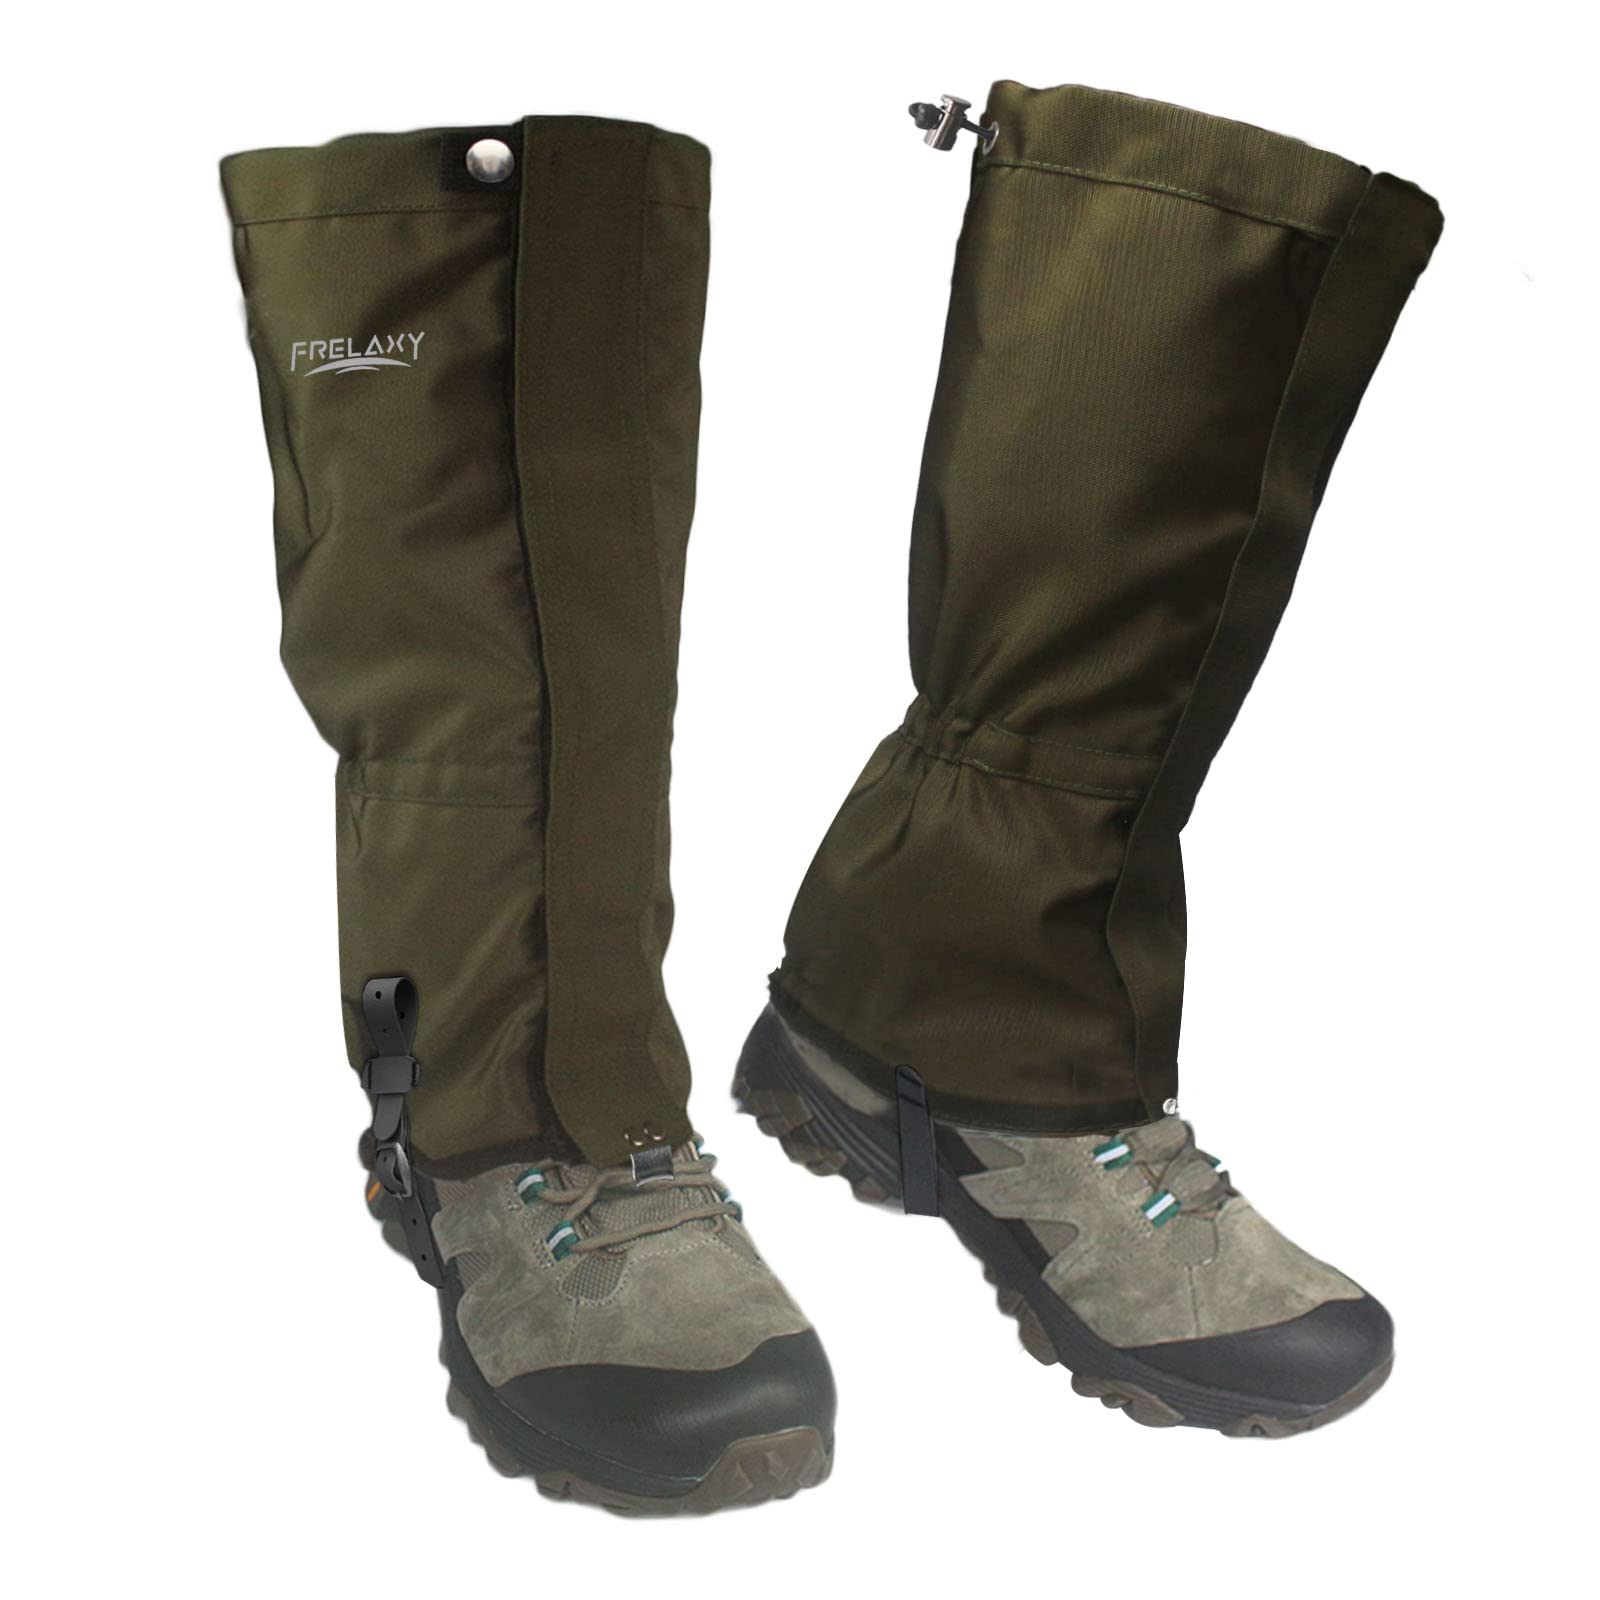 Frelaxy Leg Gaiters Ultra HIGH-Performance Hunting Gaiters, 100% Waterproof  Hiking Gaiters with Upgraded Rubber